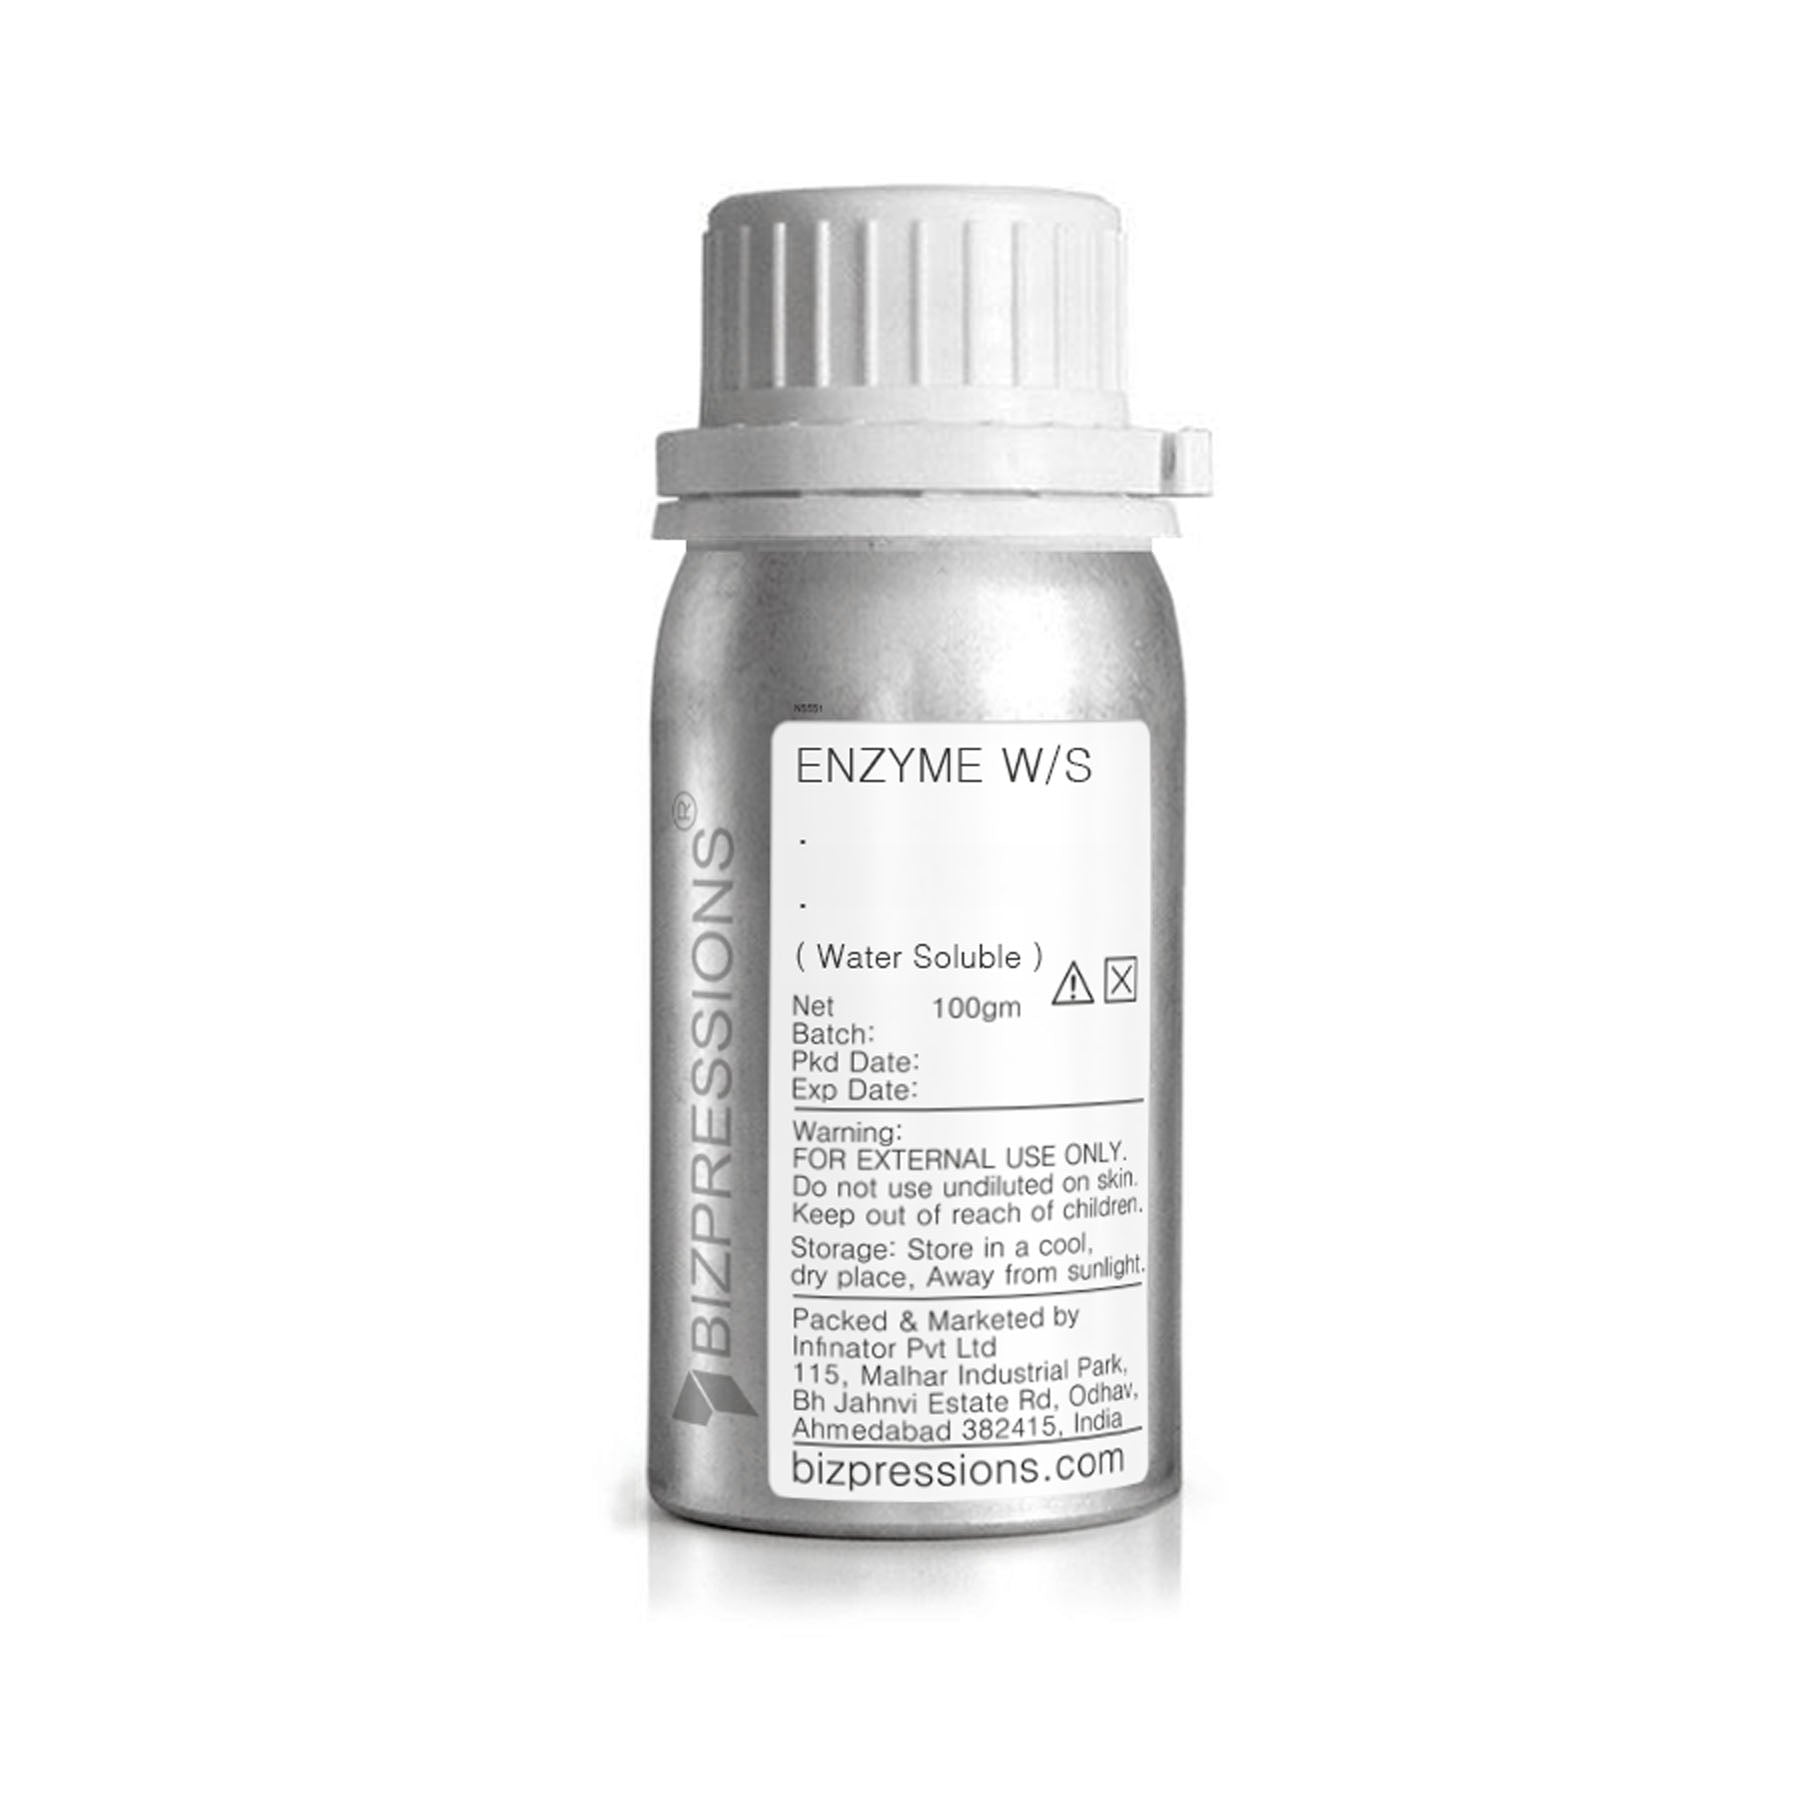 ENZYME W/S - Fragrance ( Water Soluble ) - 100 gm